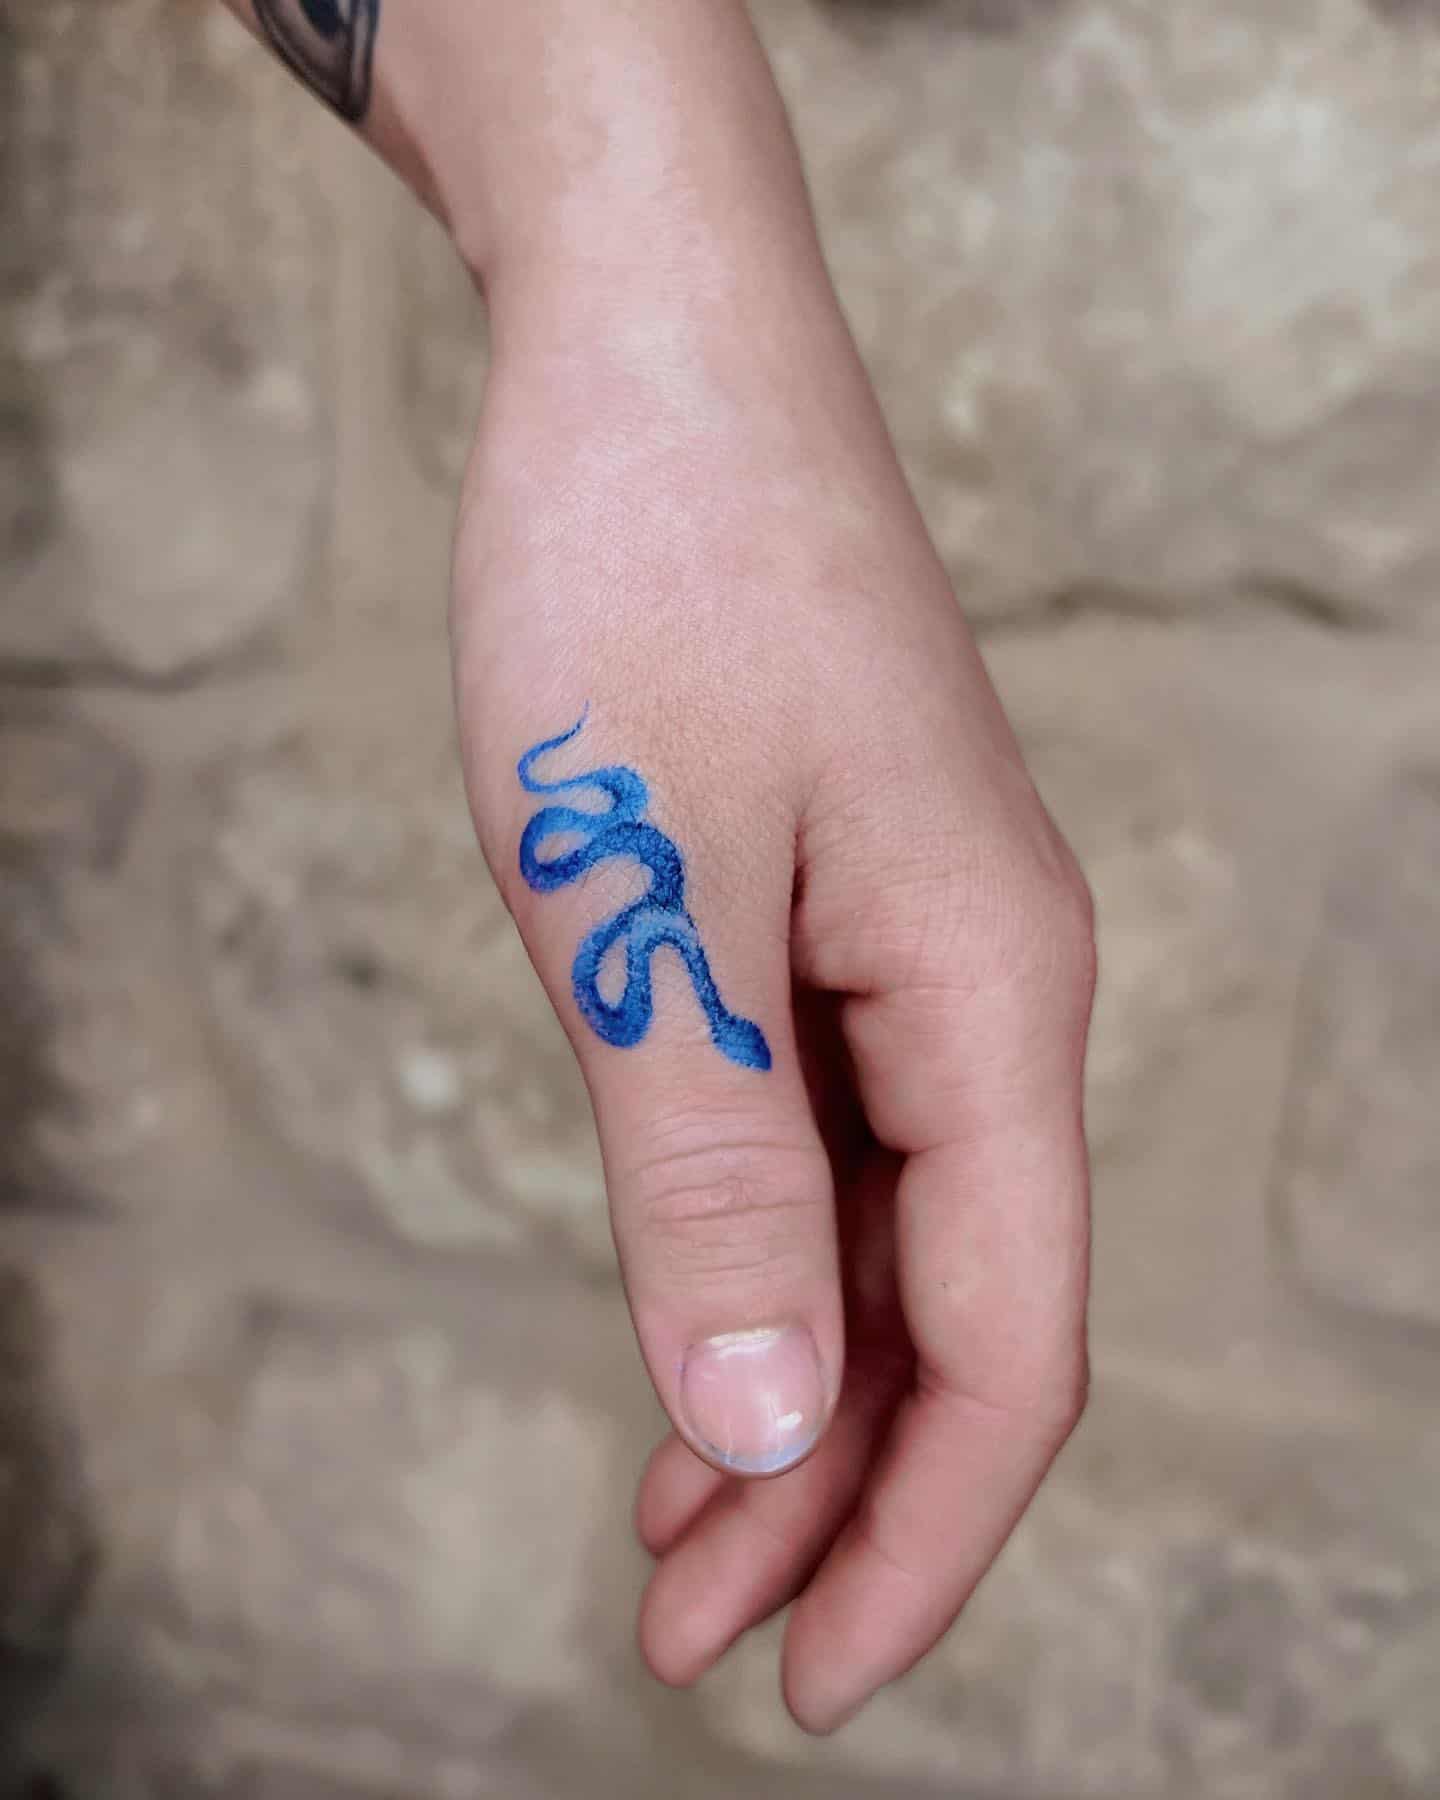 46 Unique Initial Tattoos For Men and Women  Our Mindful Life